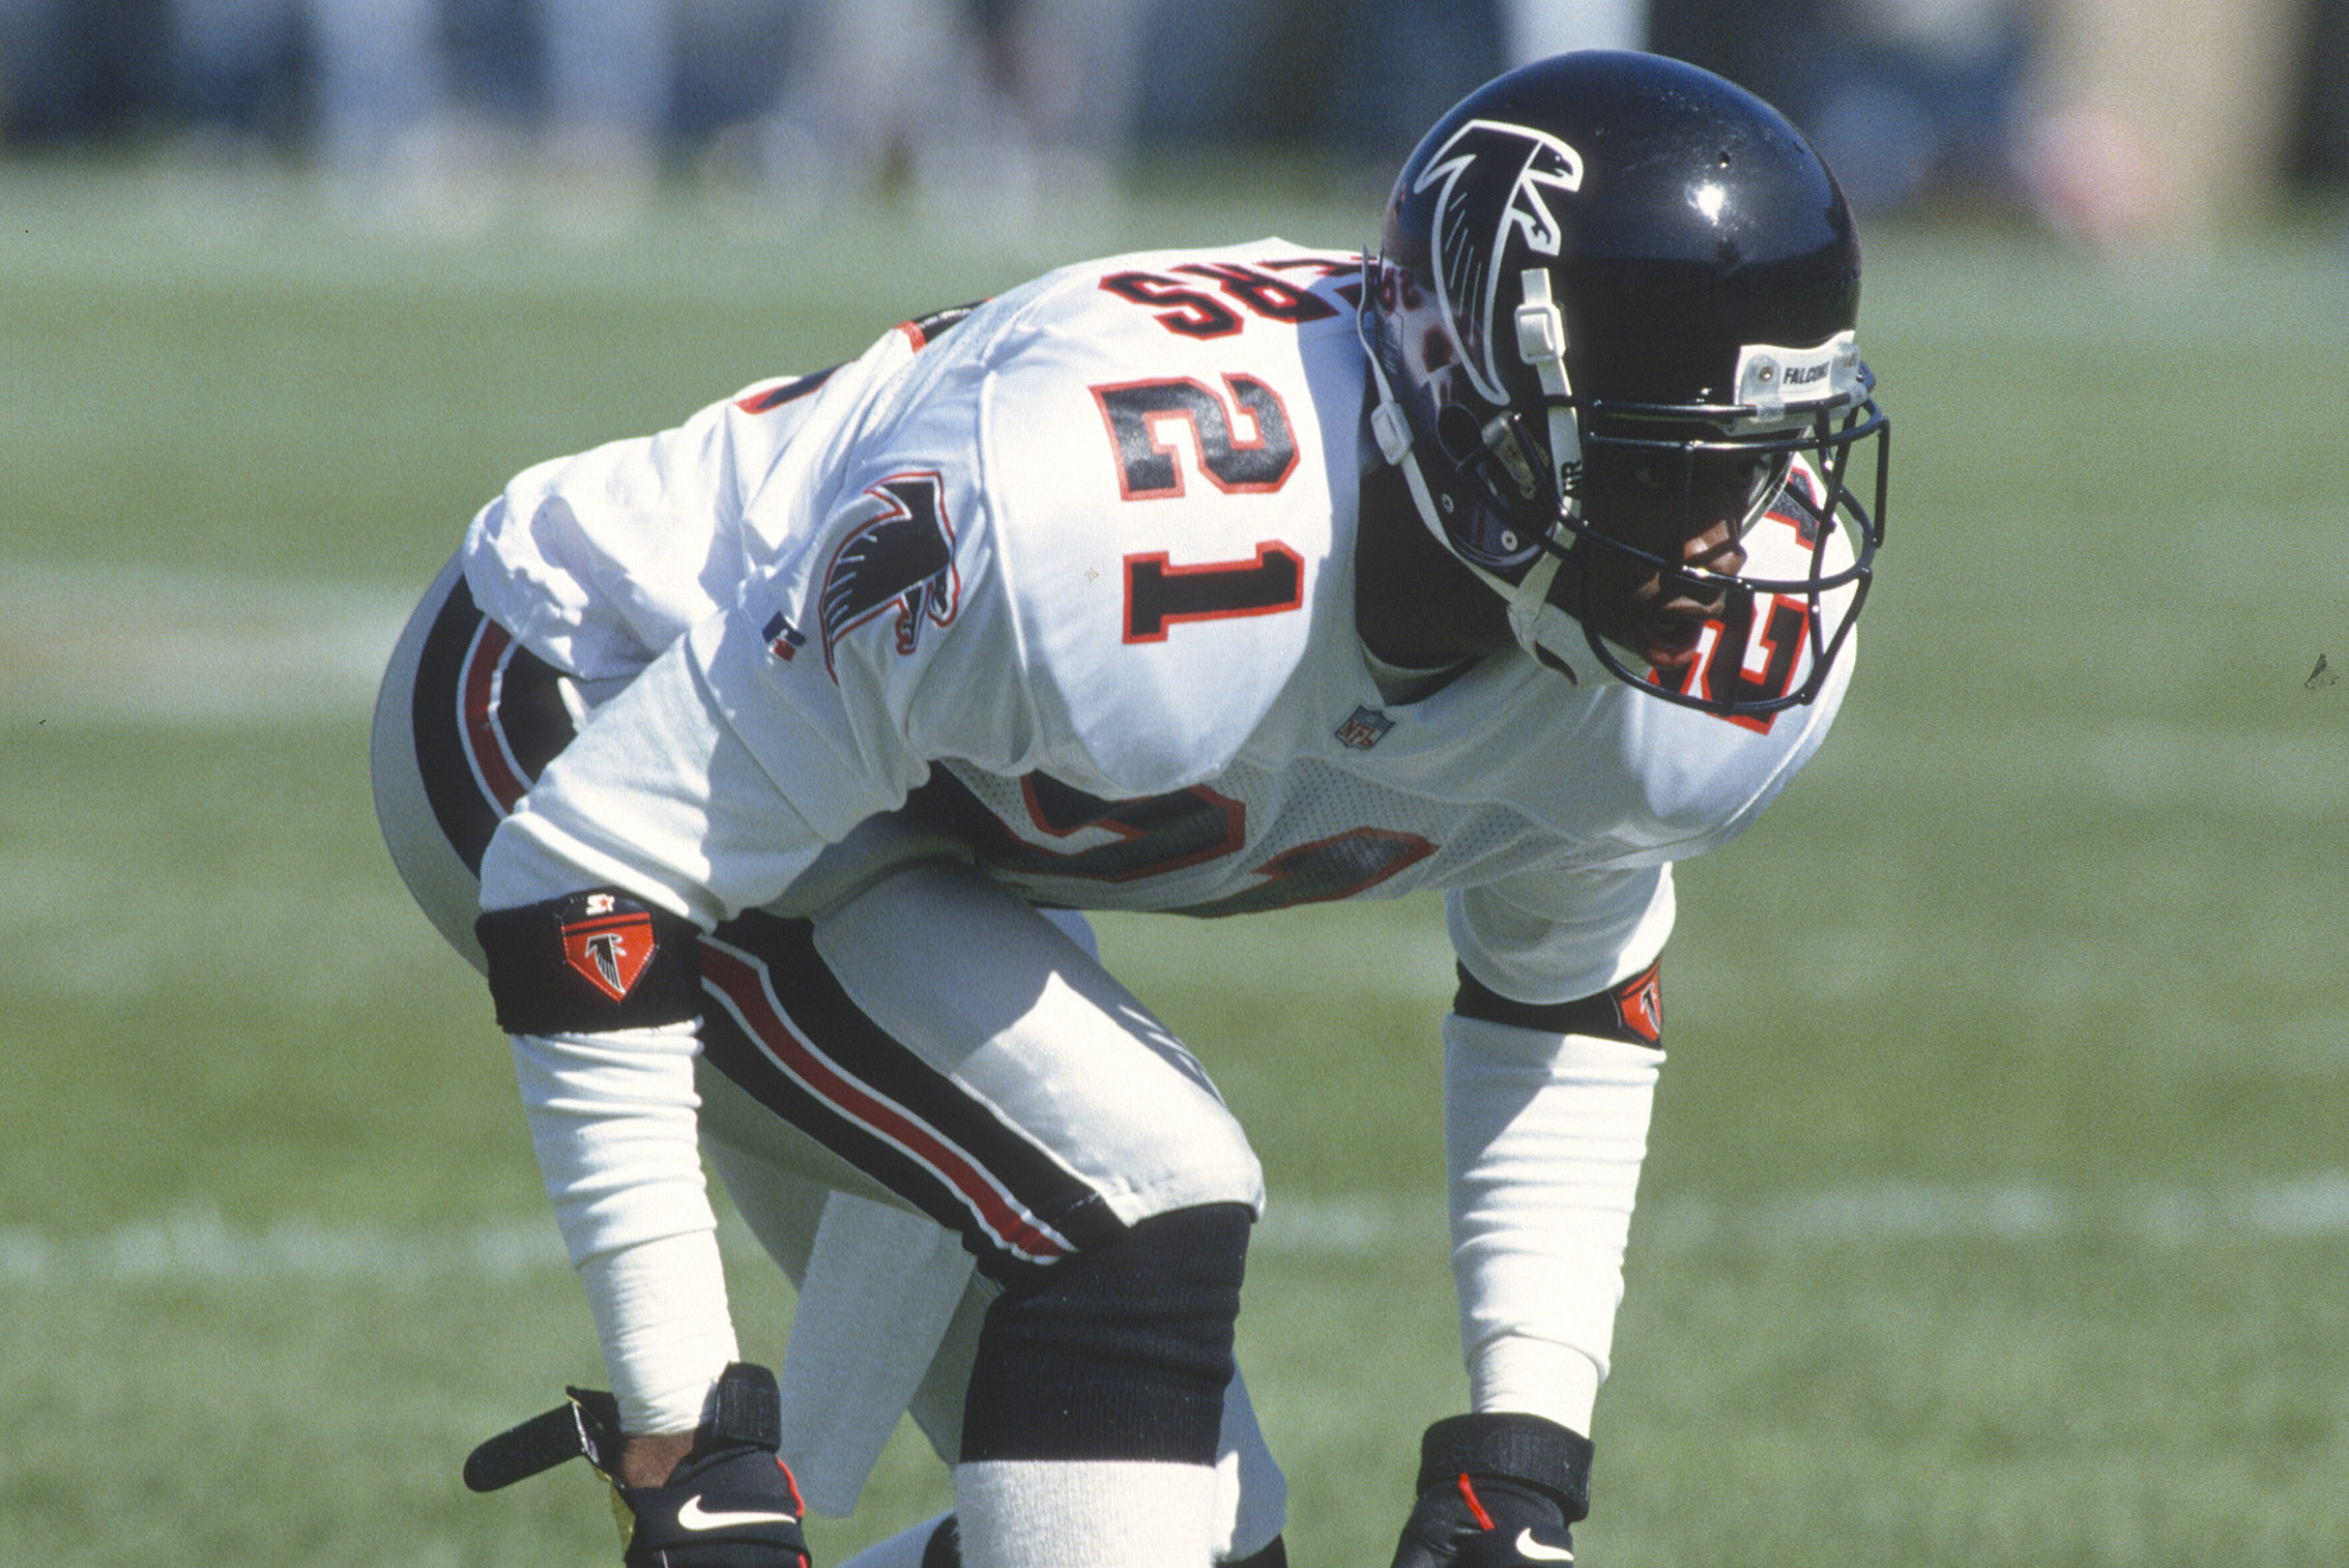 For Deion Sanders, he's come home to Atlanta